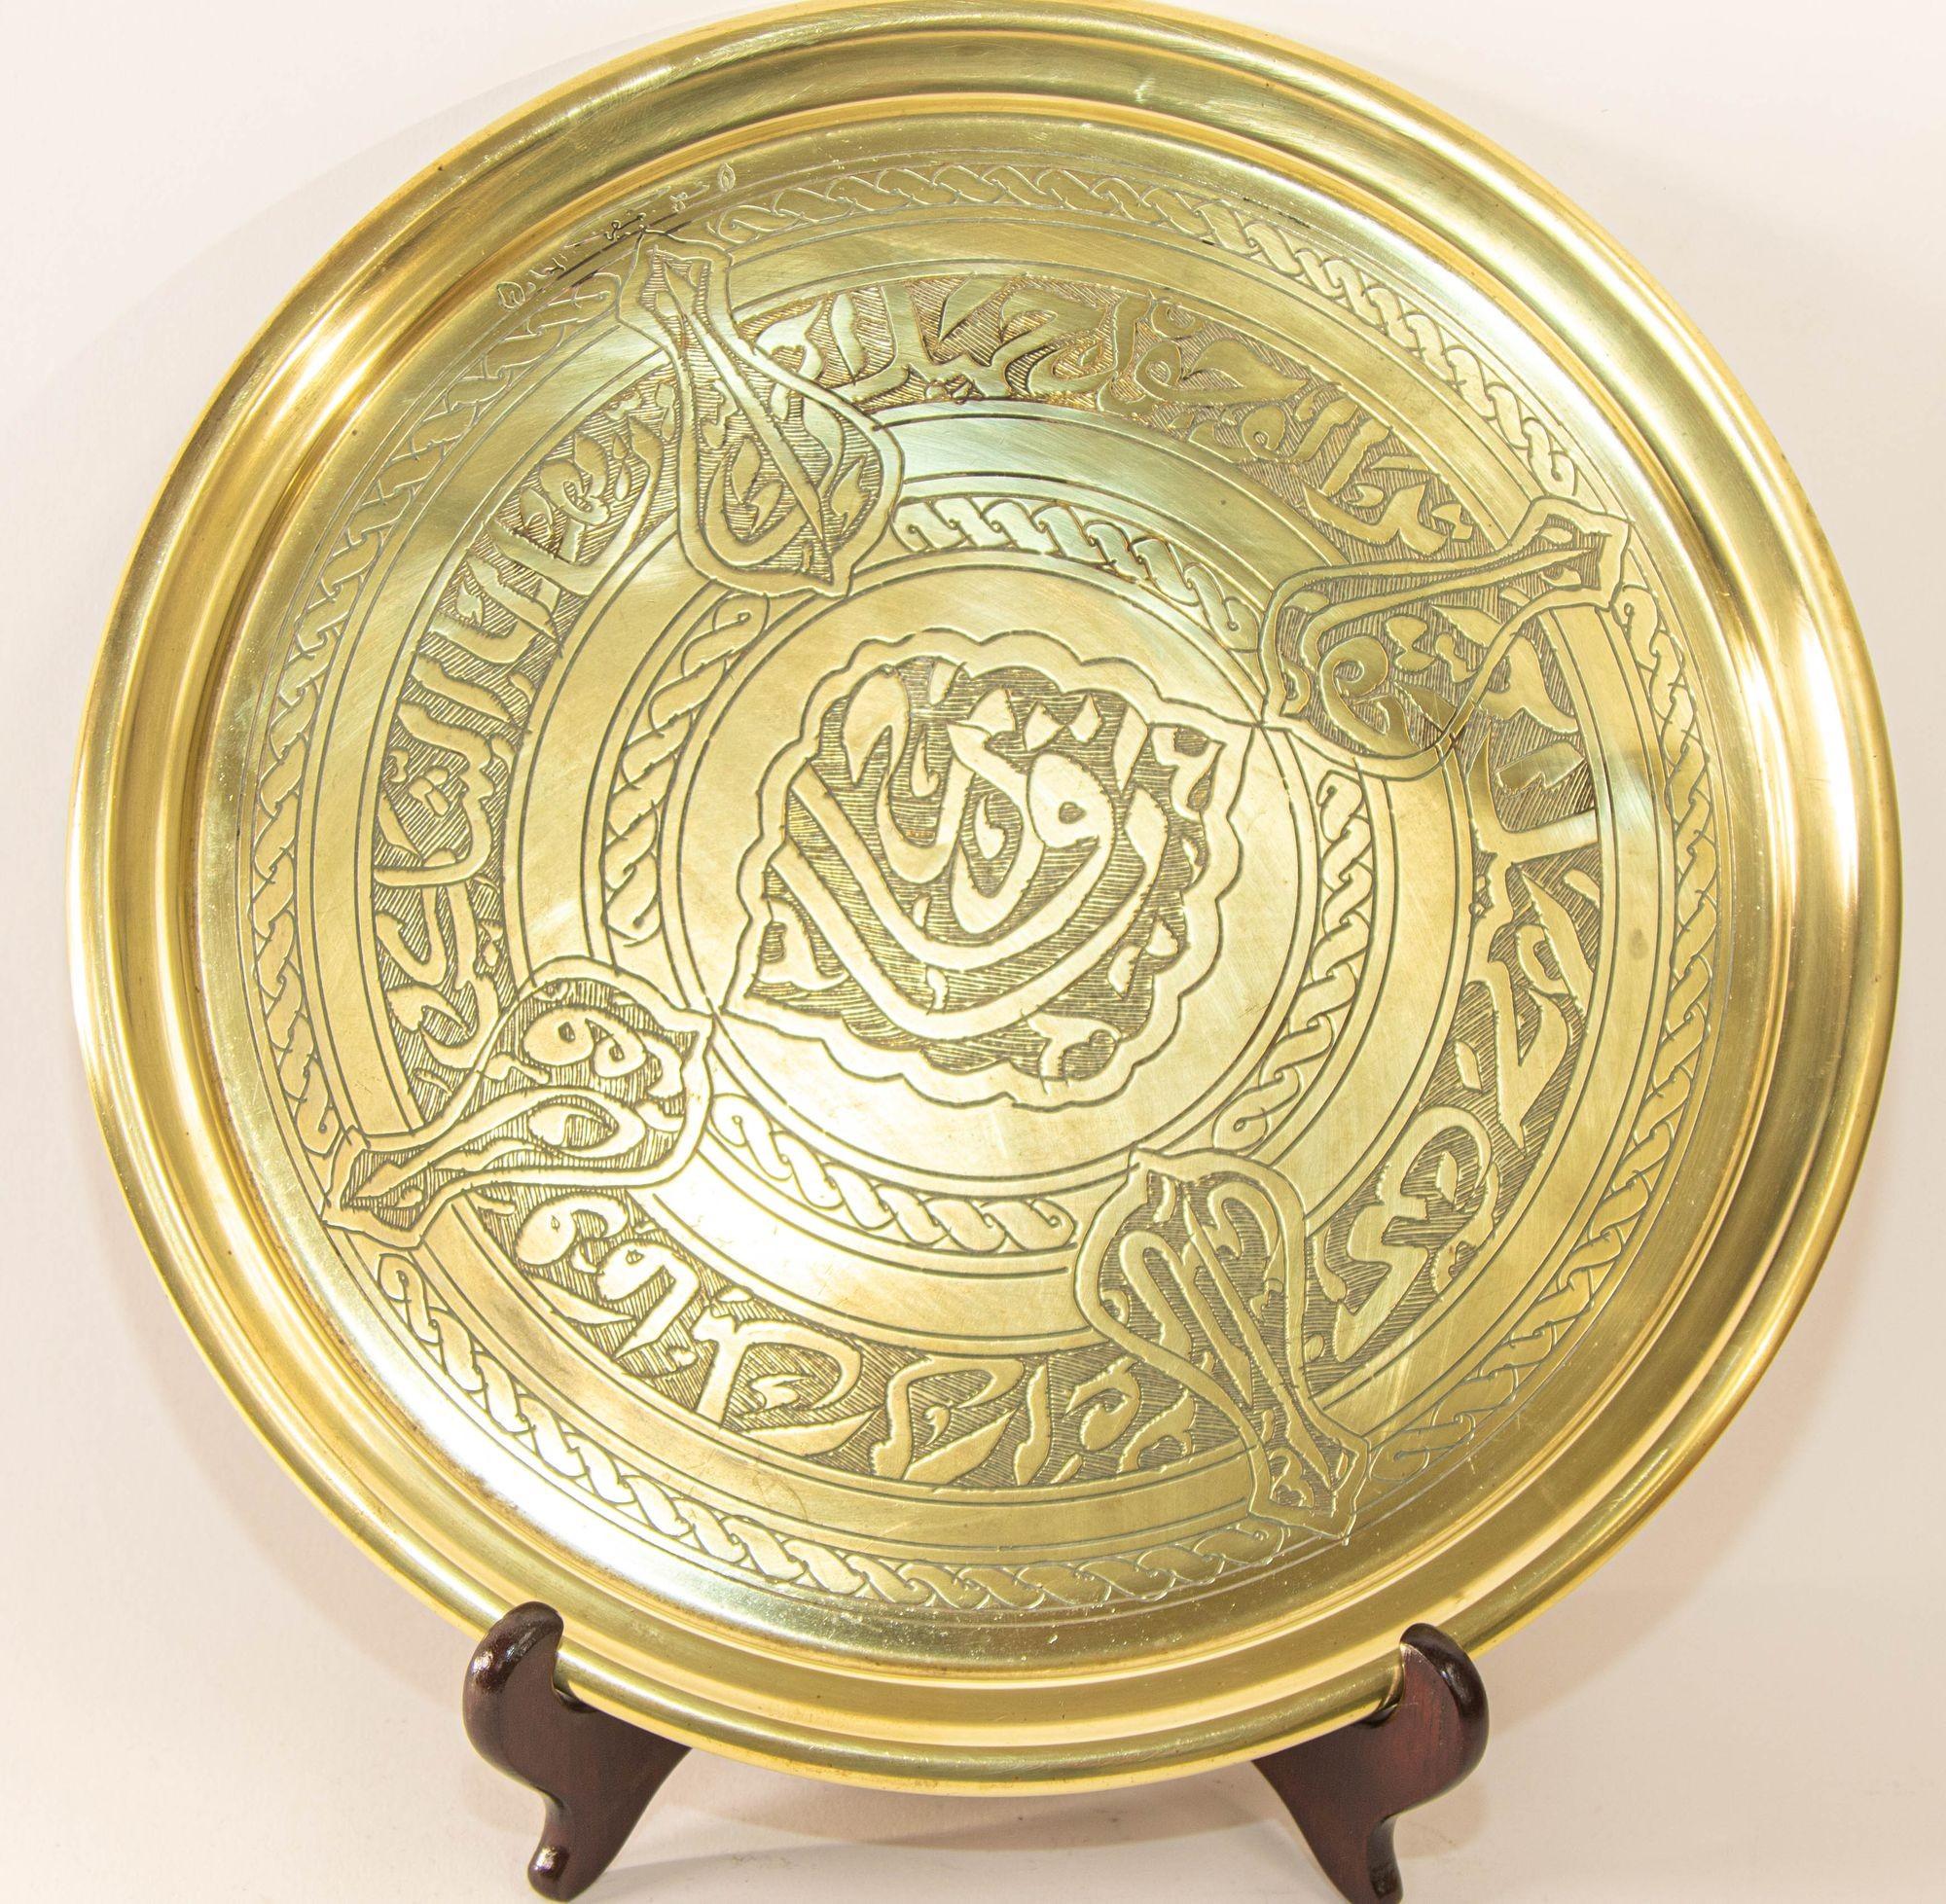 1940s Collectible Islamic Art Handcrafted Chased Etched Polished Brass Tray For Sale 3